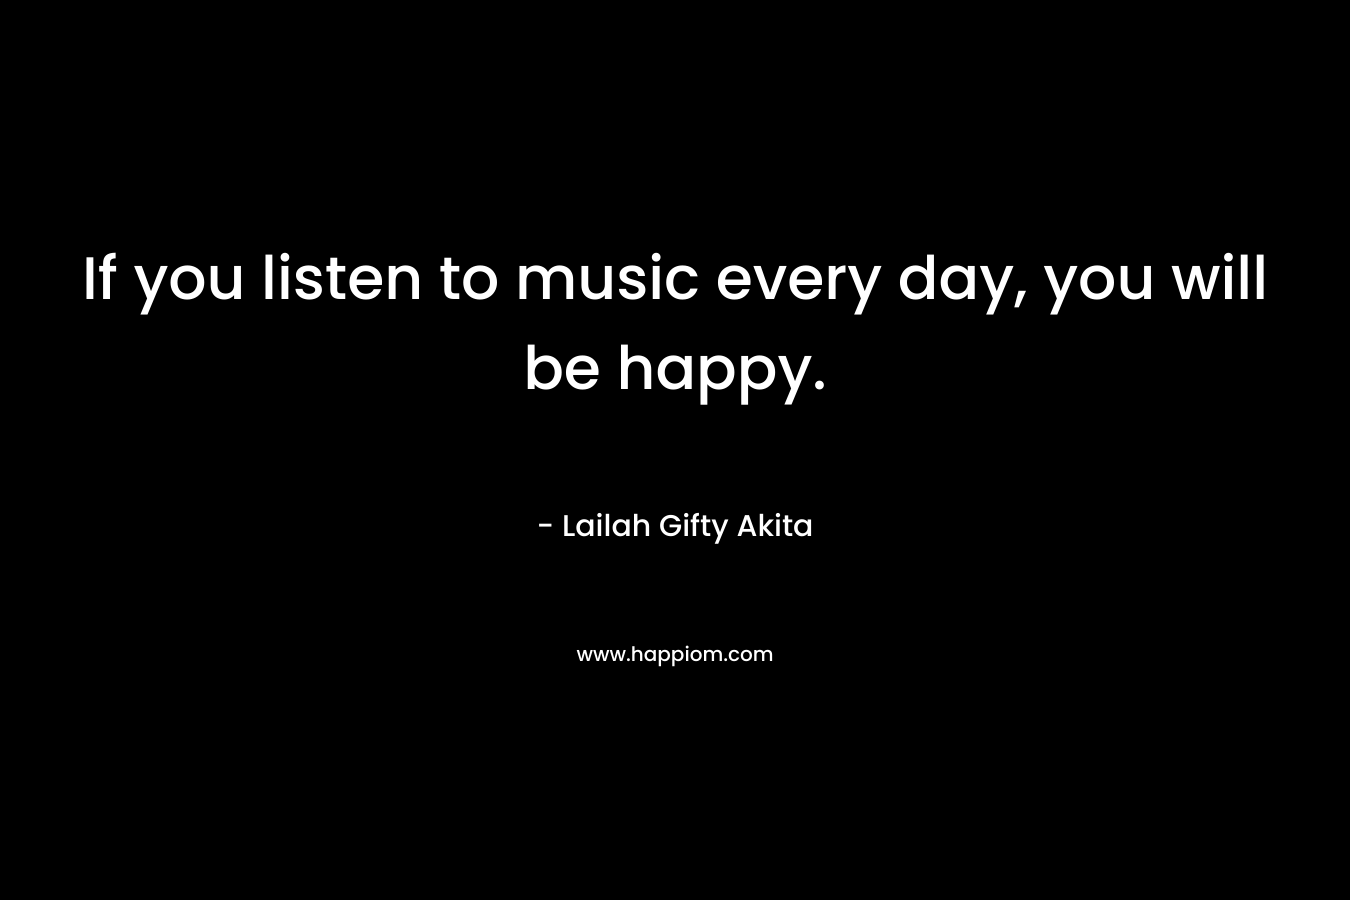 If you listen to music every day, you will be happy.